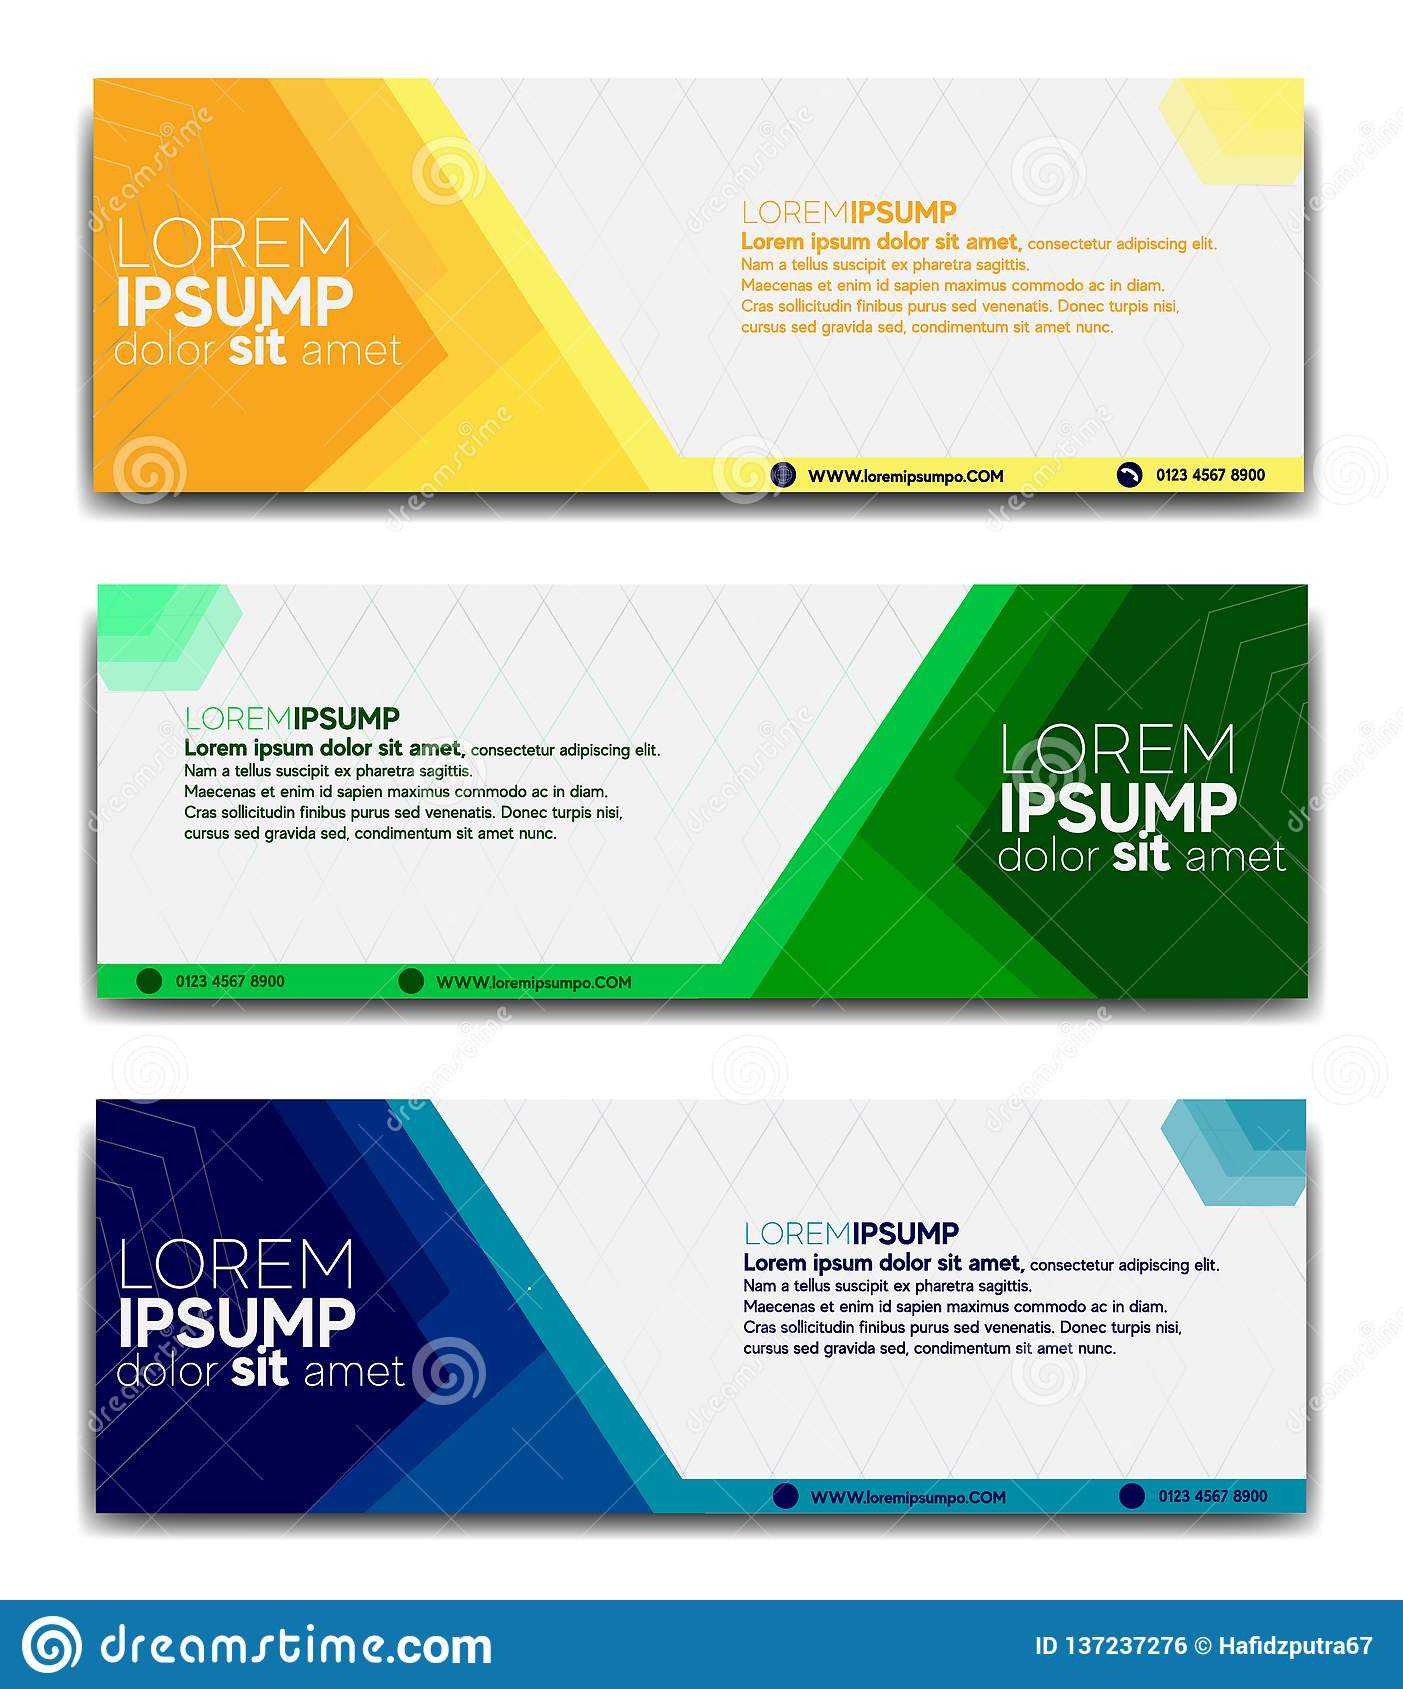 Promotional Banner Design Template 2019 Stock Vector With Regard To Website Banner Design Templates